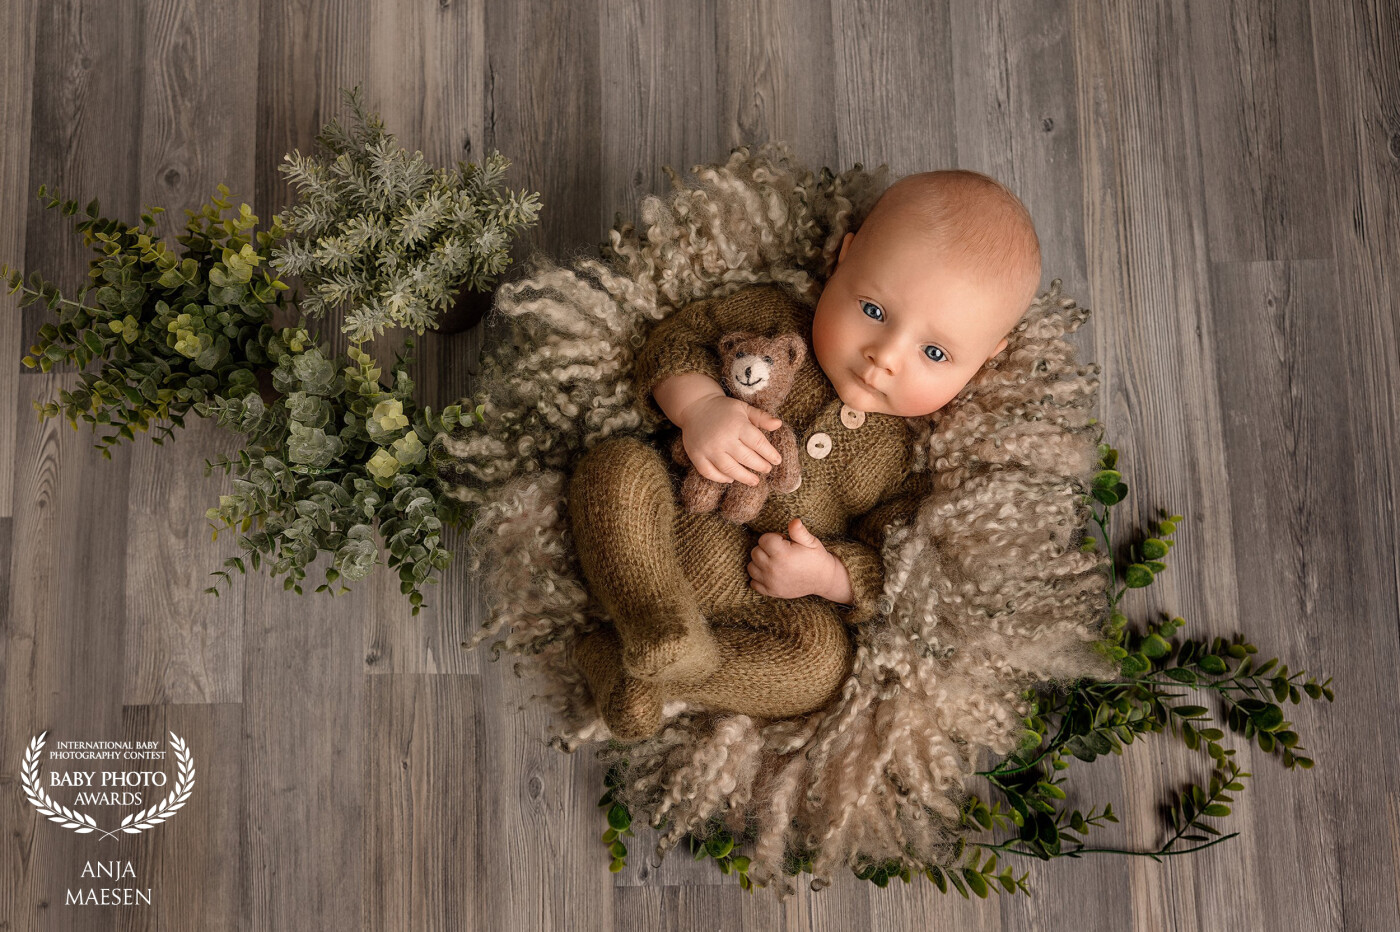 This little boy came back on 5 weeks for a second shoot, because he wasn't very into it the first time. He nailed it this time! <3